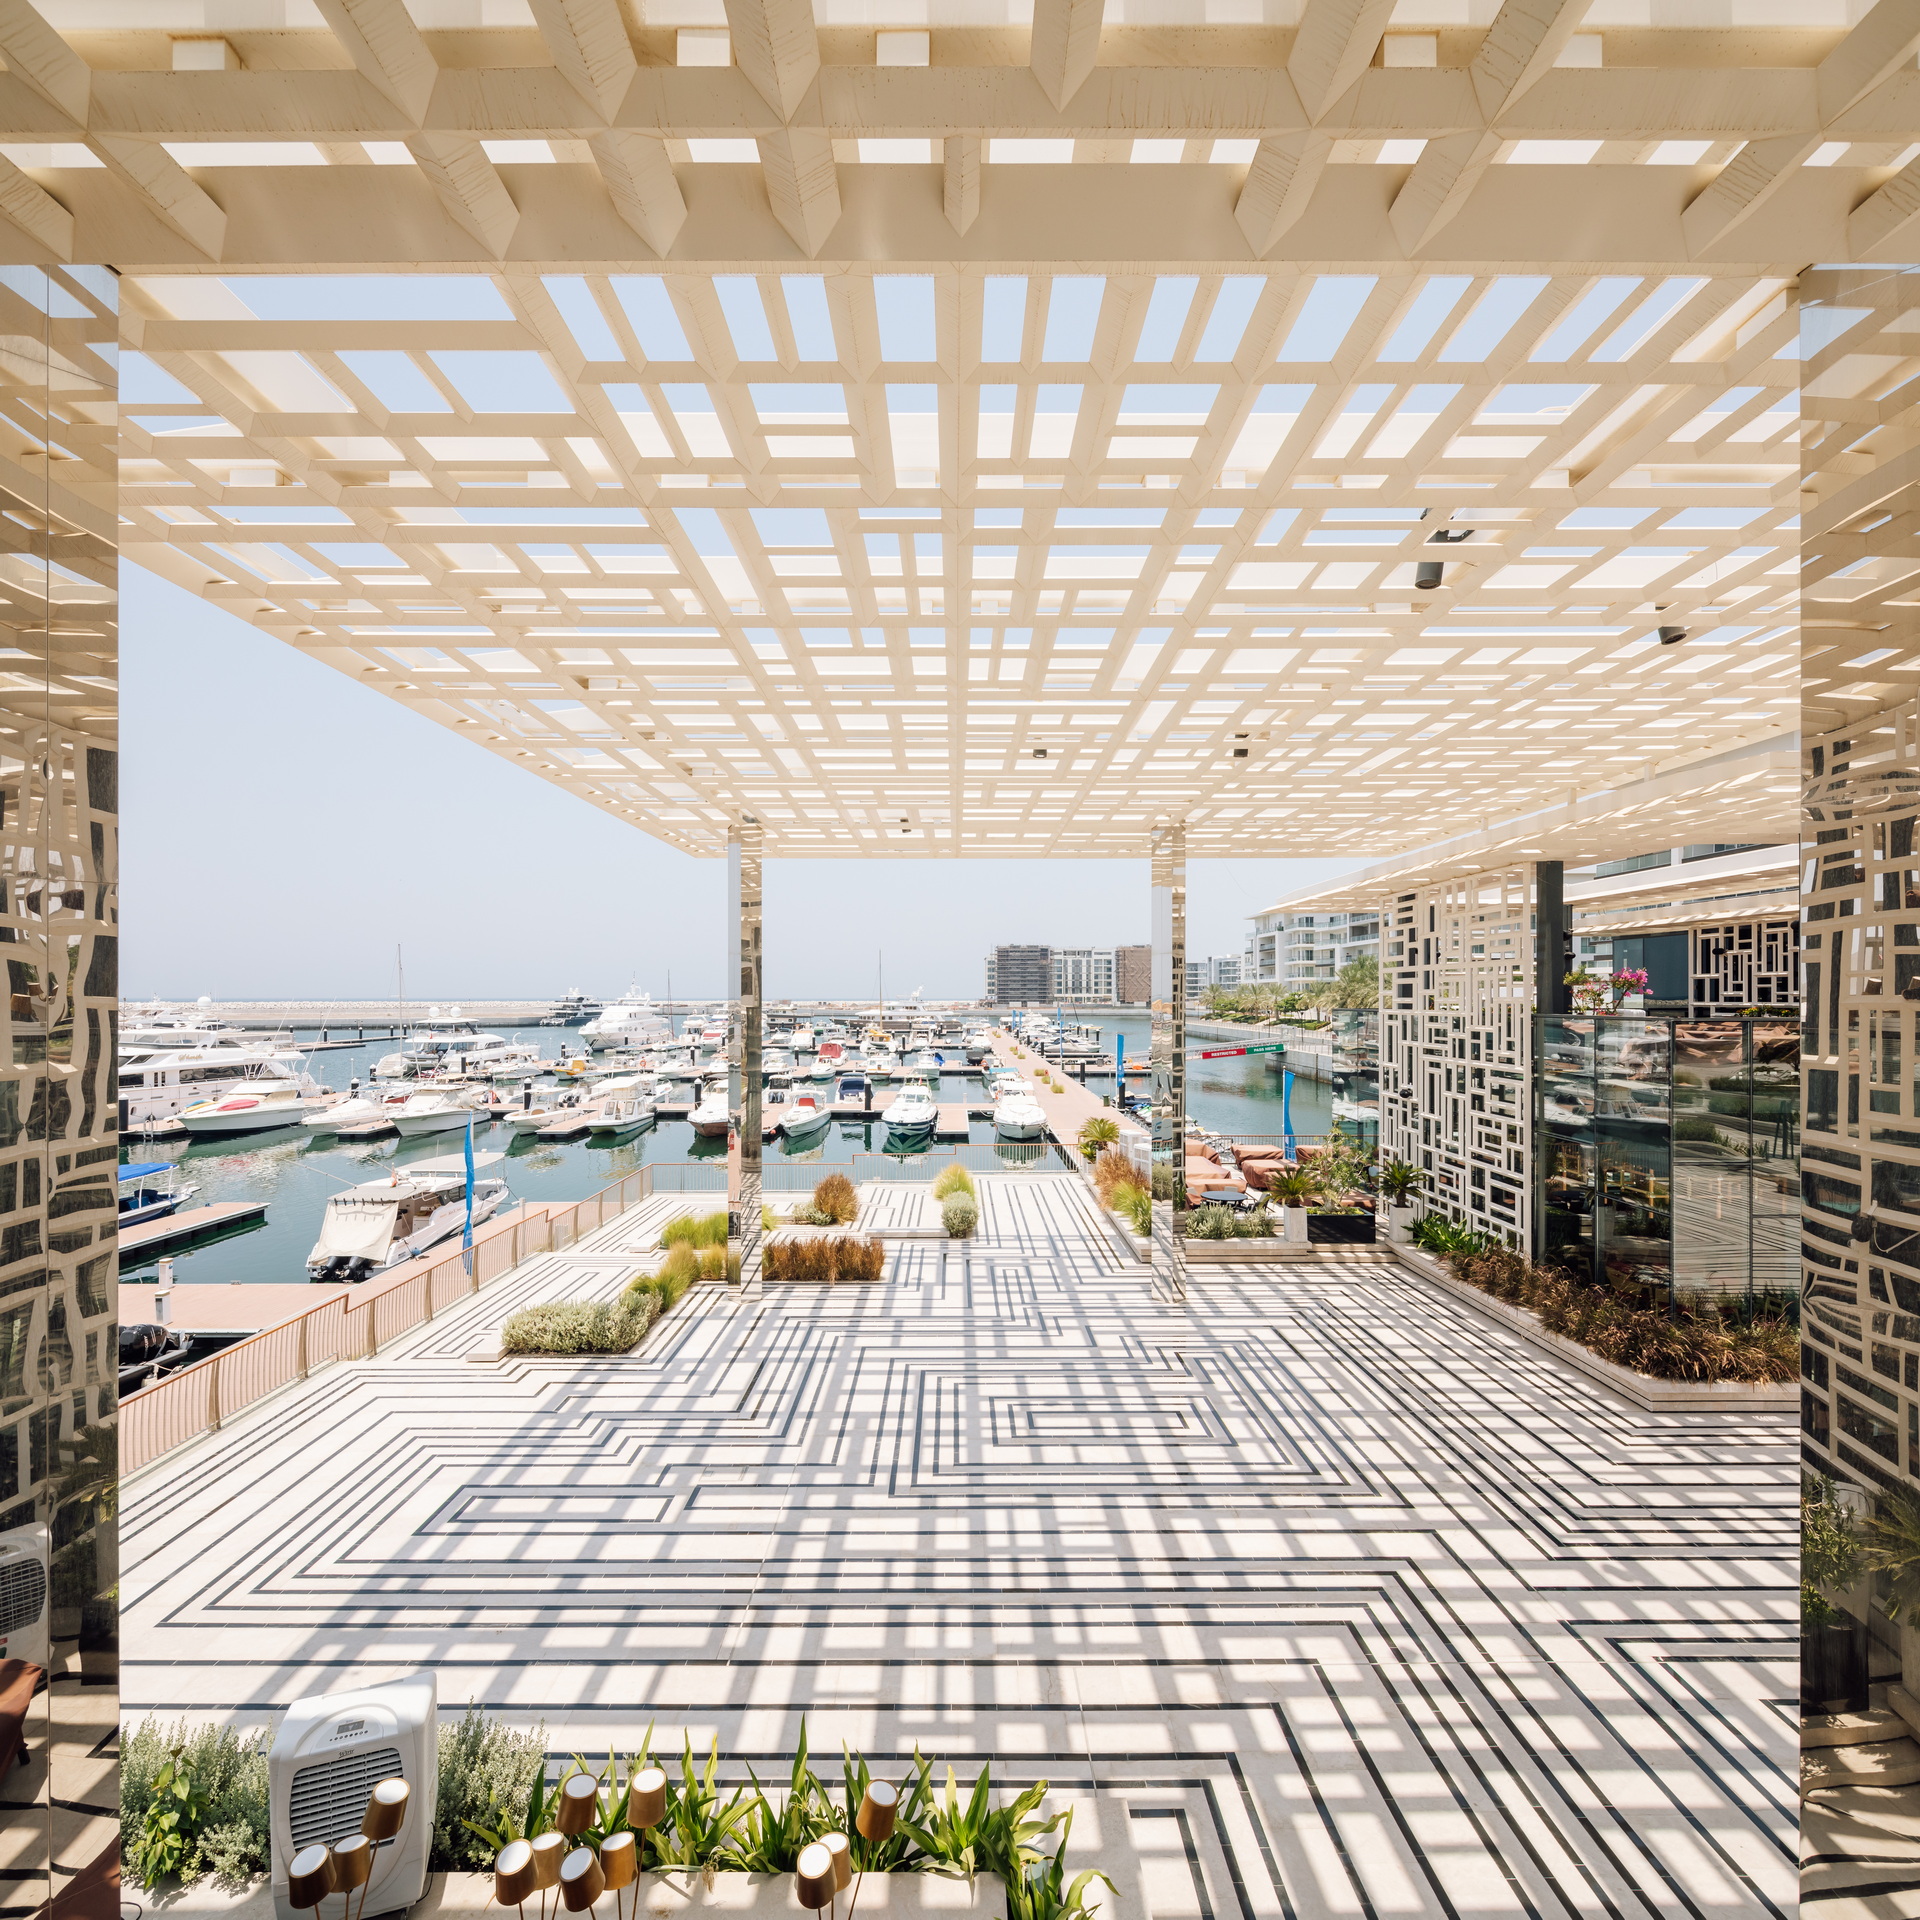 <p>The landscaped surface, of local Desert Rose marble inset with black granite lines, draws from traditional Omani patterns and shares a unified visual identity with the powder-coated aluminium mashrabiya walls of the restaurant and café buildings and the shading canopies, blurring the boundaries between elements.&nbsp;</p>